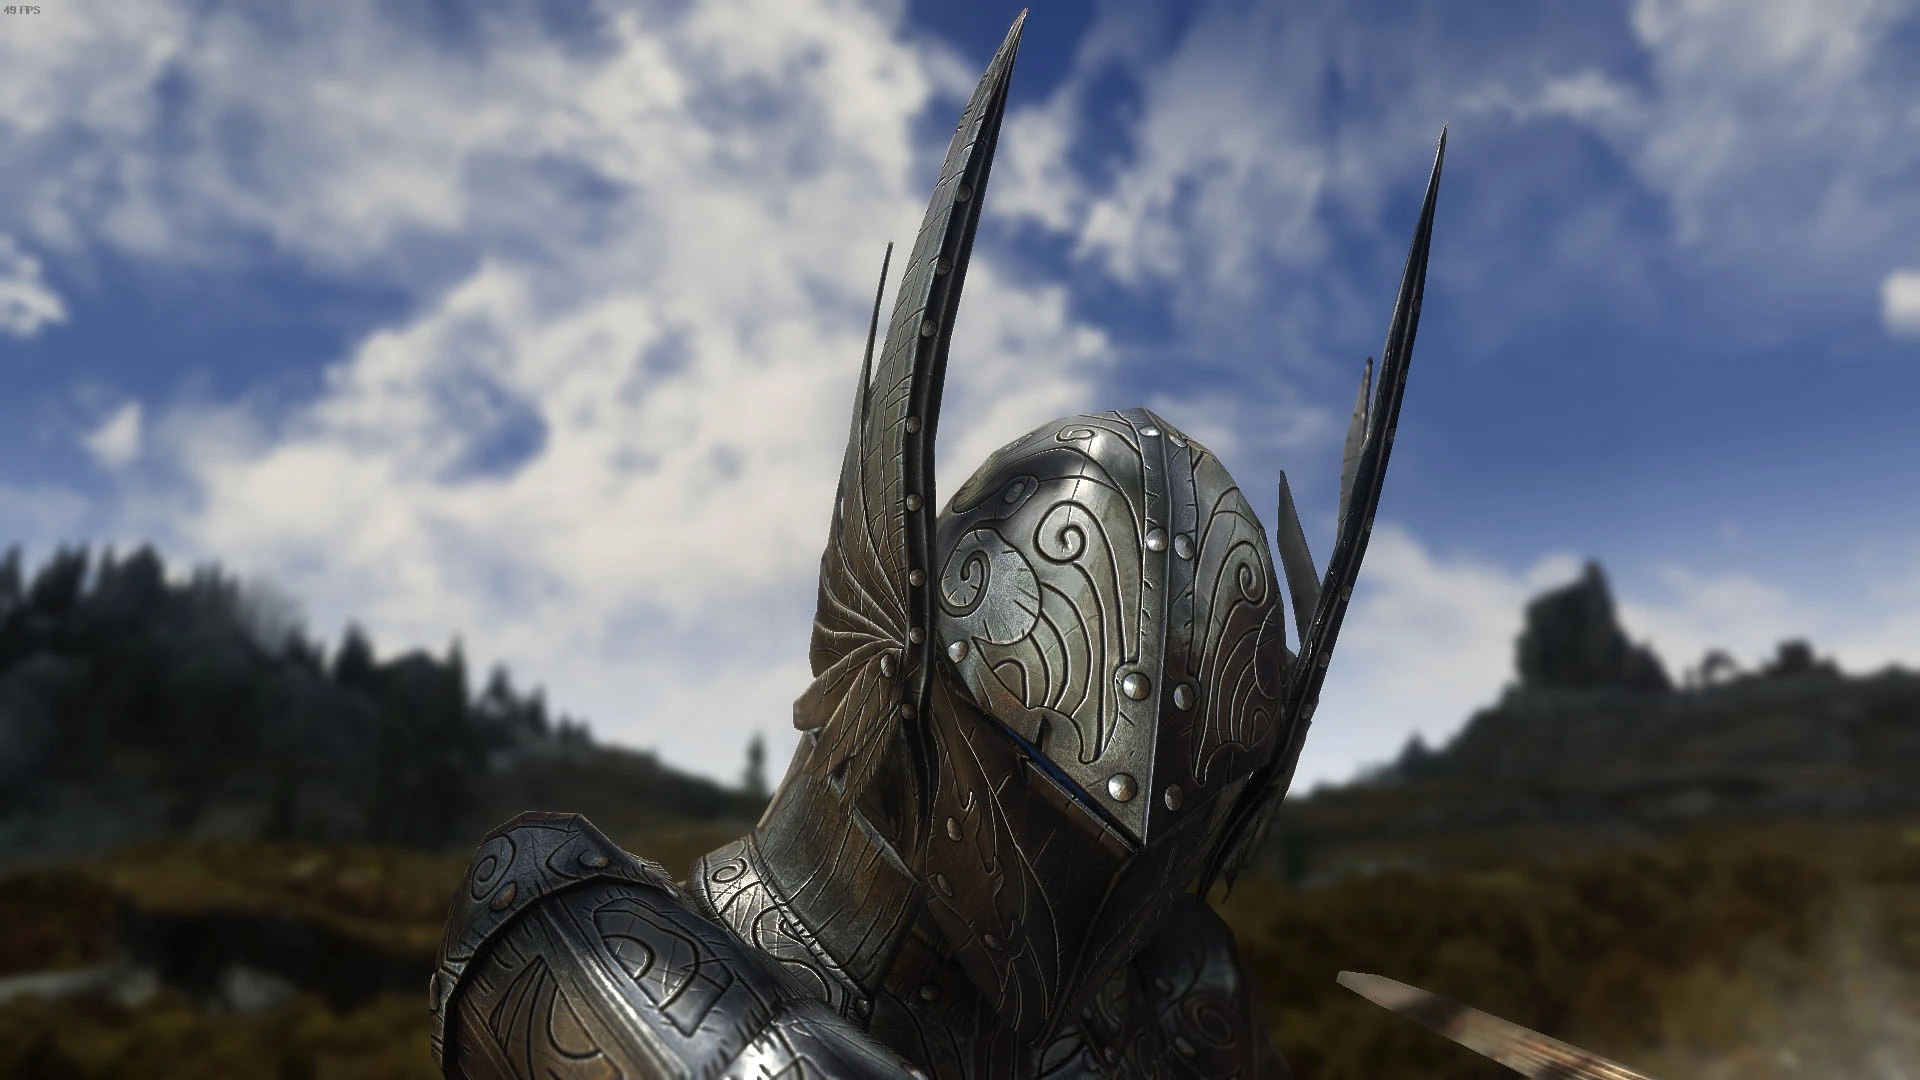 Valkyrie Armor in game test at Skyrim Nexus - Mods and Community